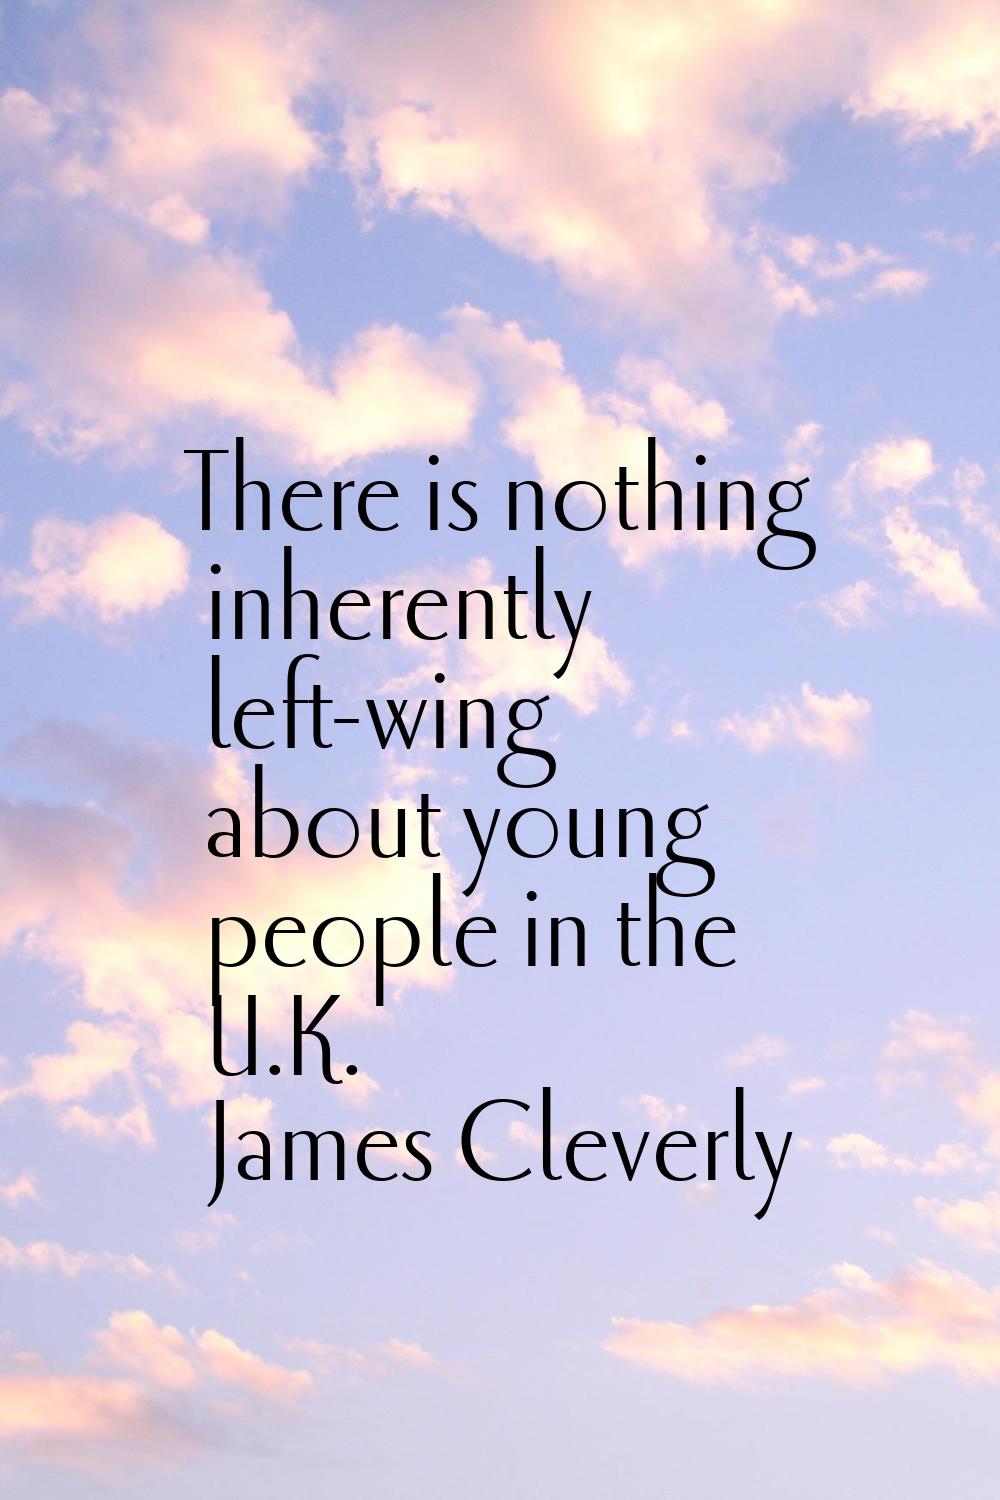 There is nothing inherently left-wing about young people in the U.K.